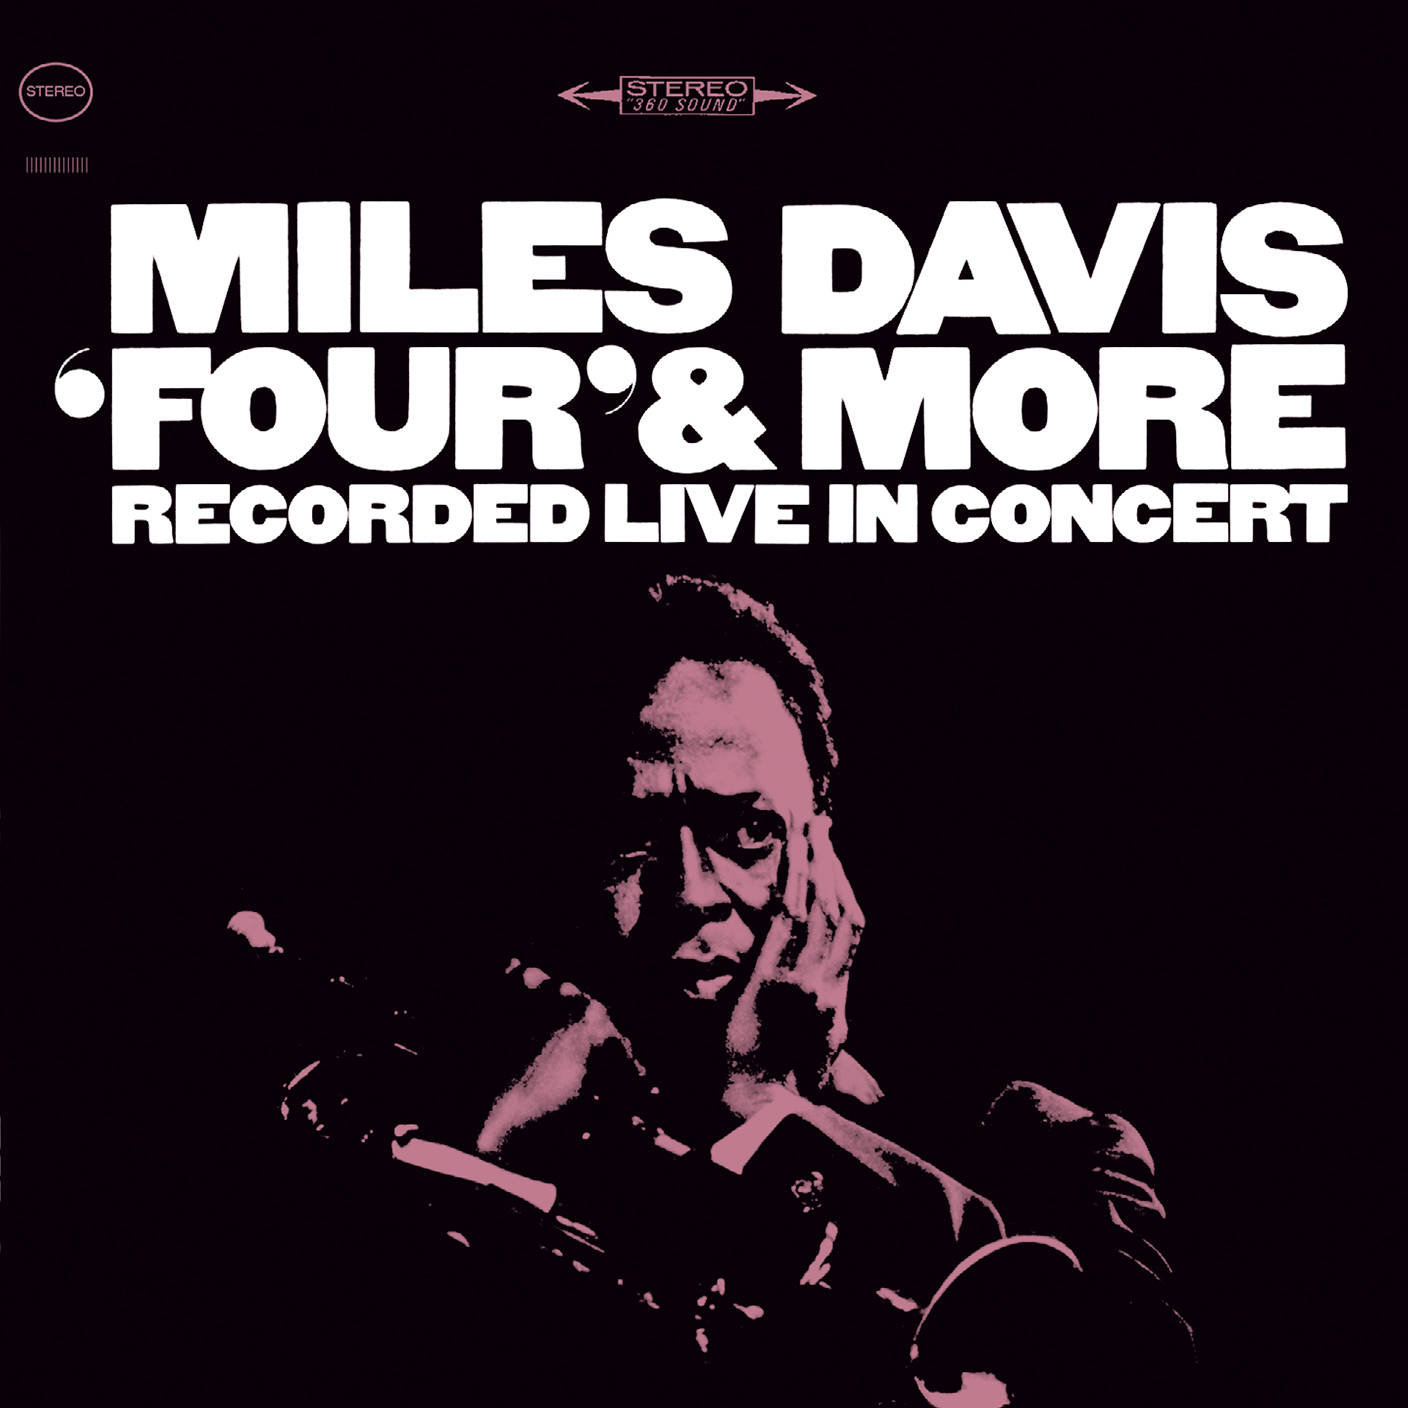 Miles Davis Four And More Record Live Concert Wallpaper